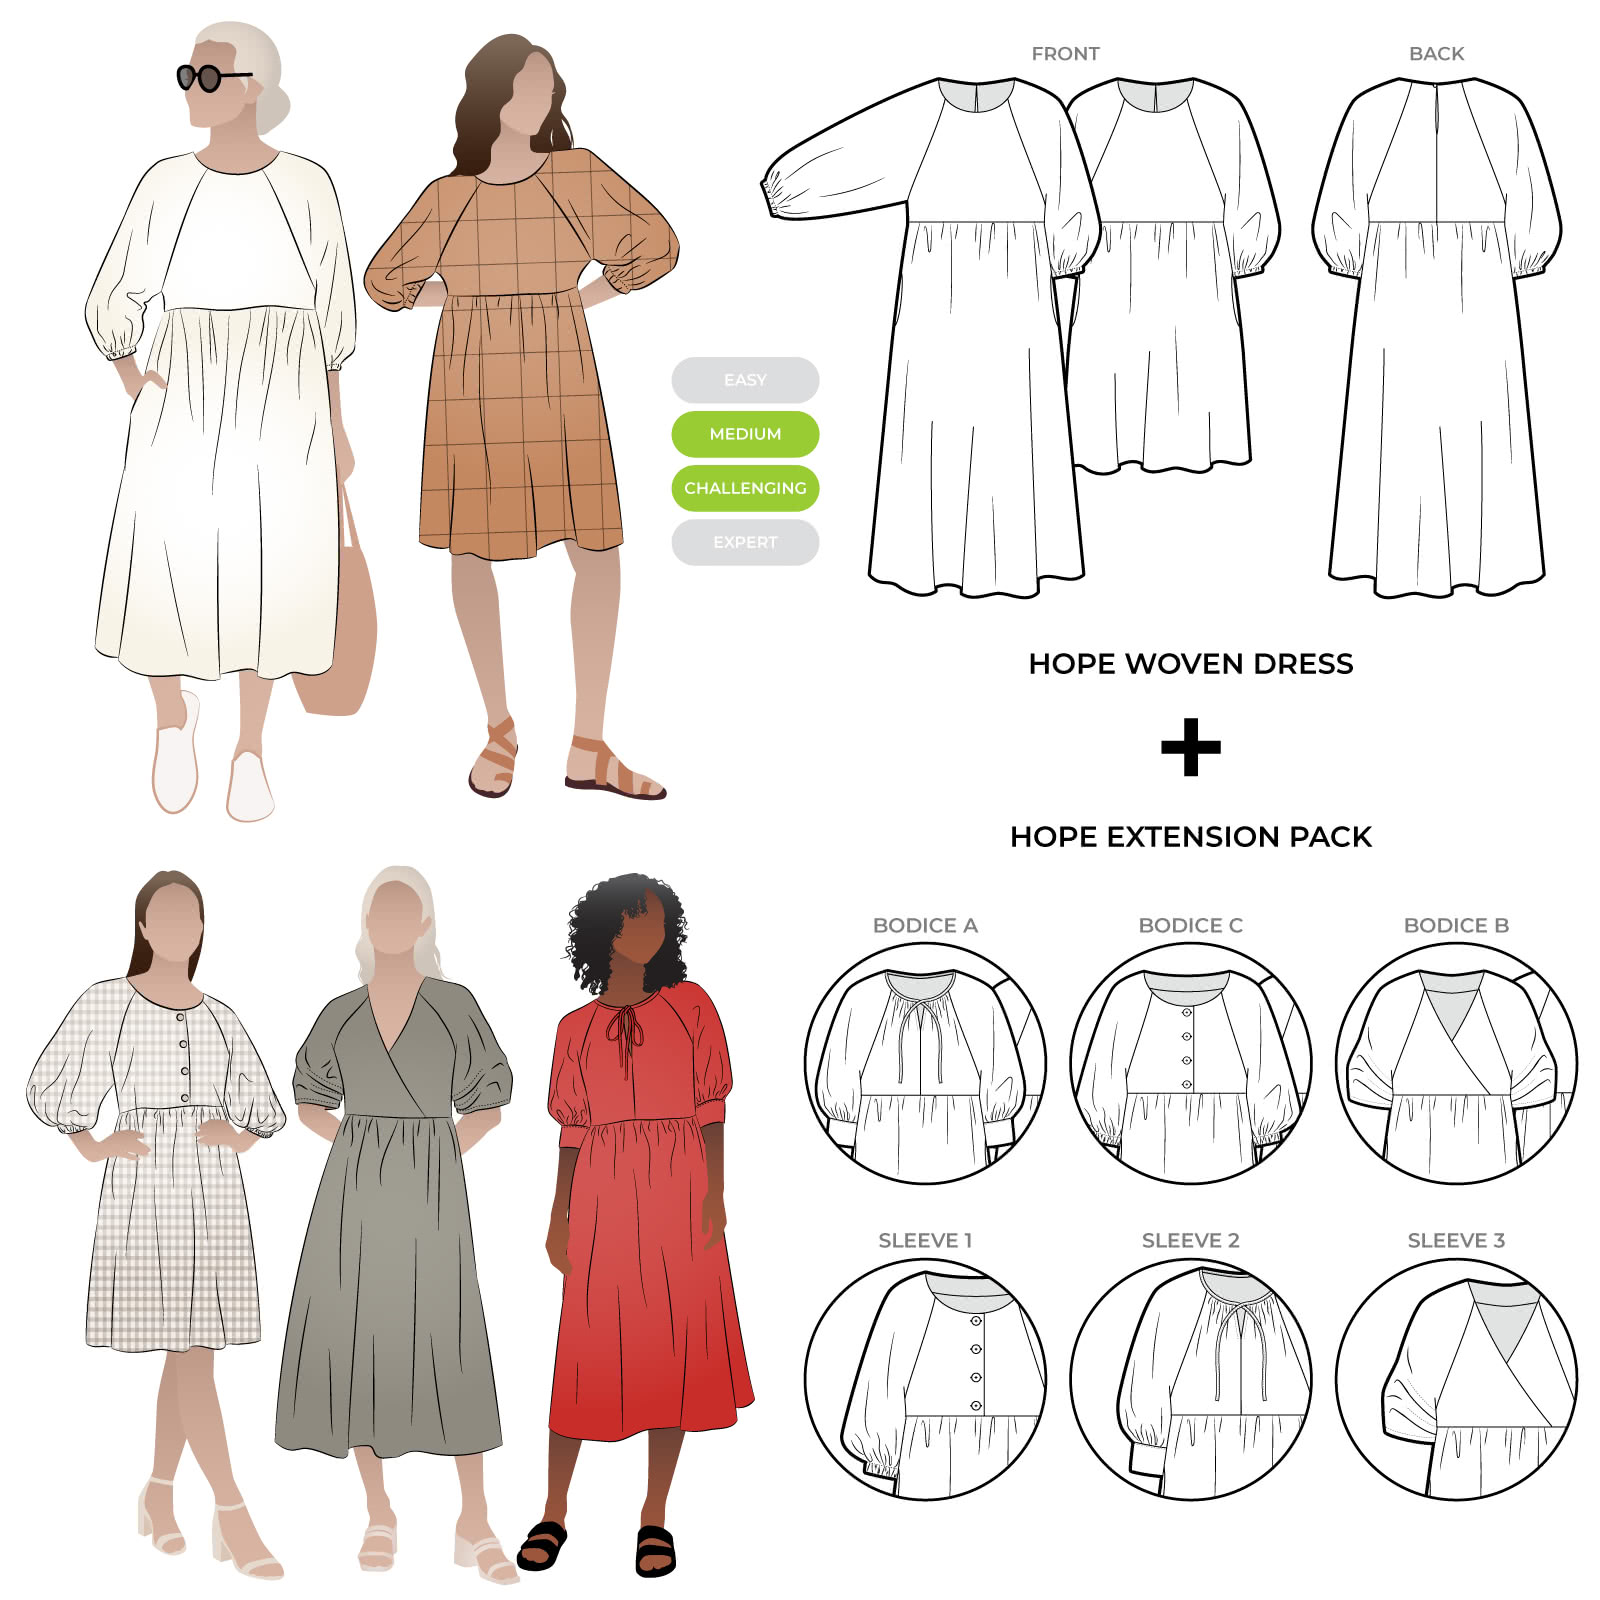 Hope Woven Dress + Extension Pack Bundle Sewing Pattern Bundle By Style Arc - Make over 9 different looks with the Hope Woven Dress + Extension Pack patterns.